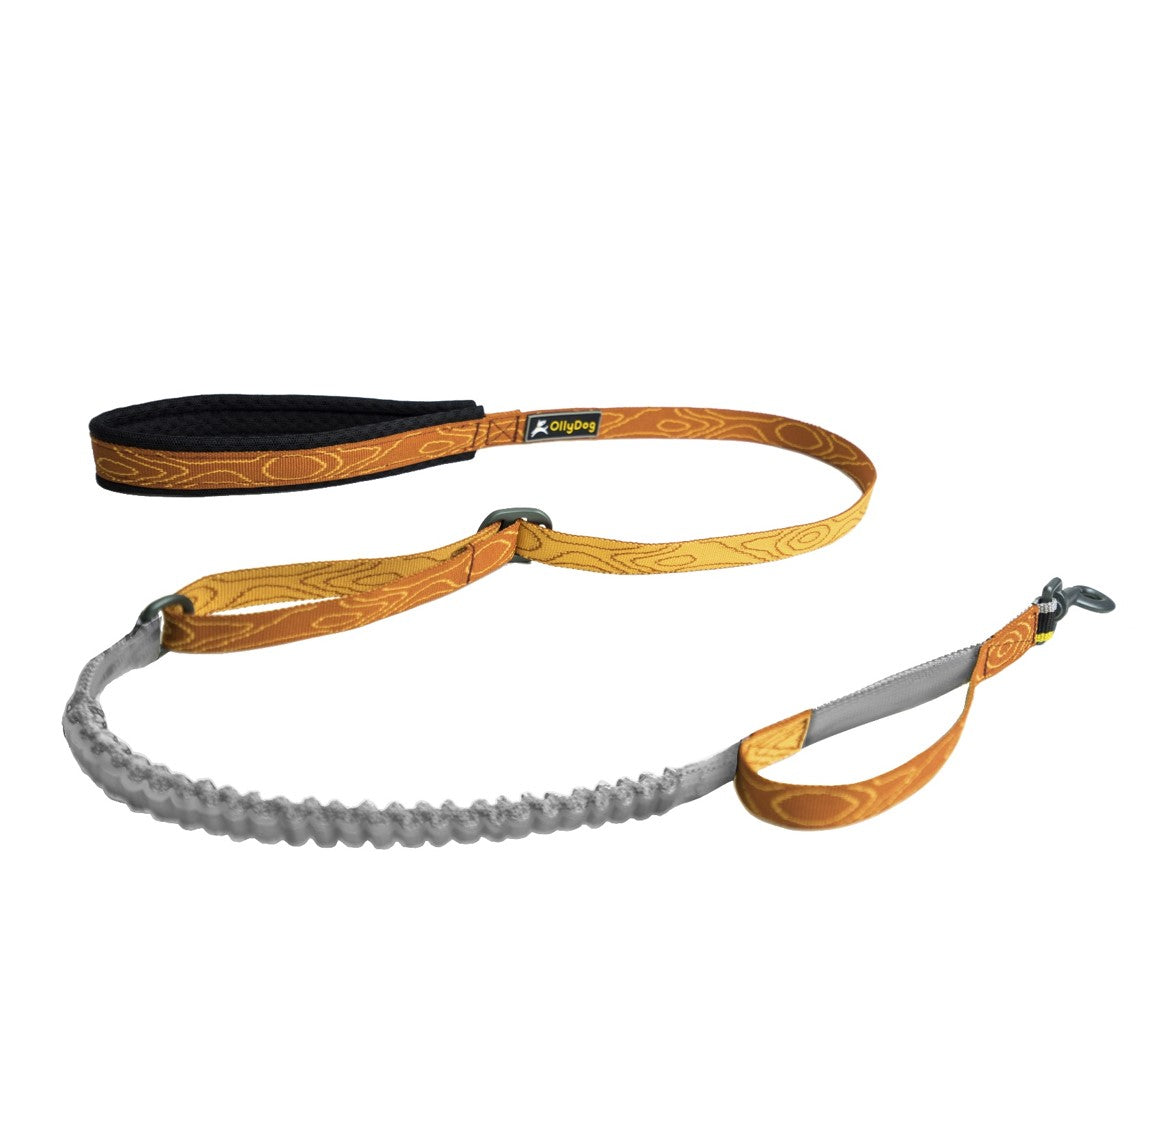 Flagstaff Adjustable Spring Leash- Save 30% at Checkout